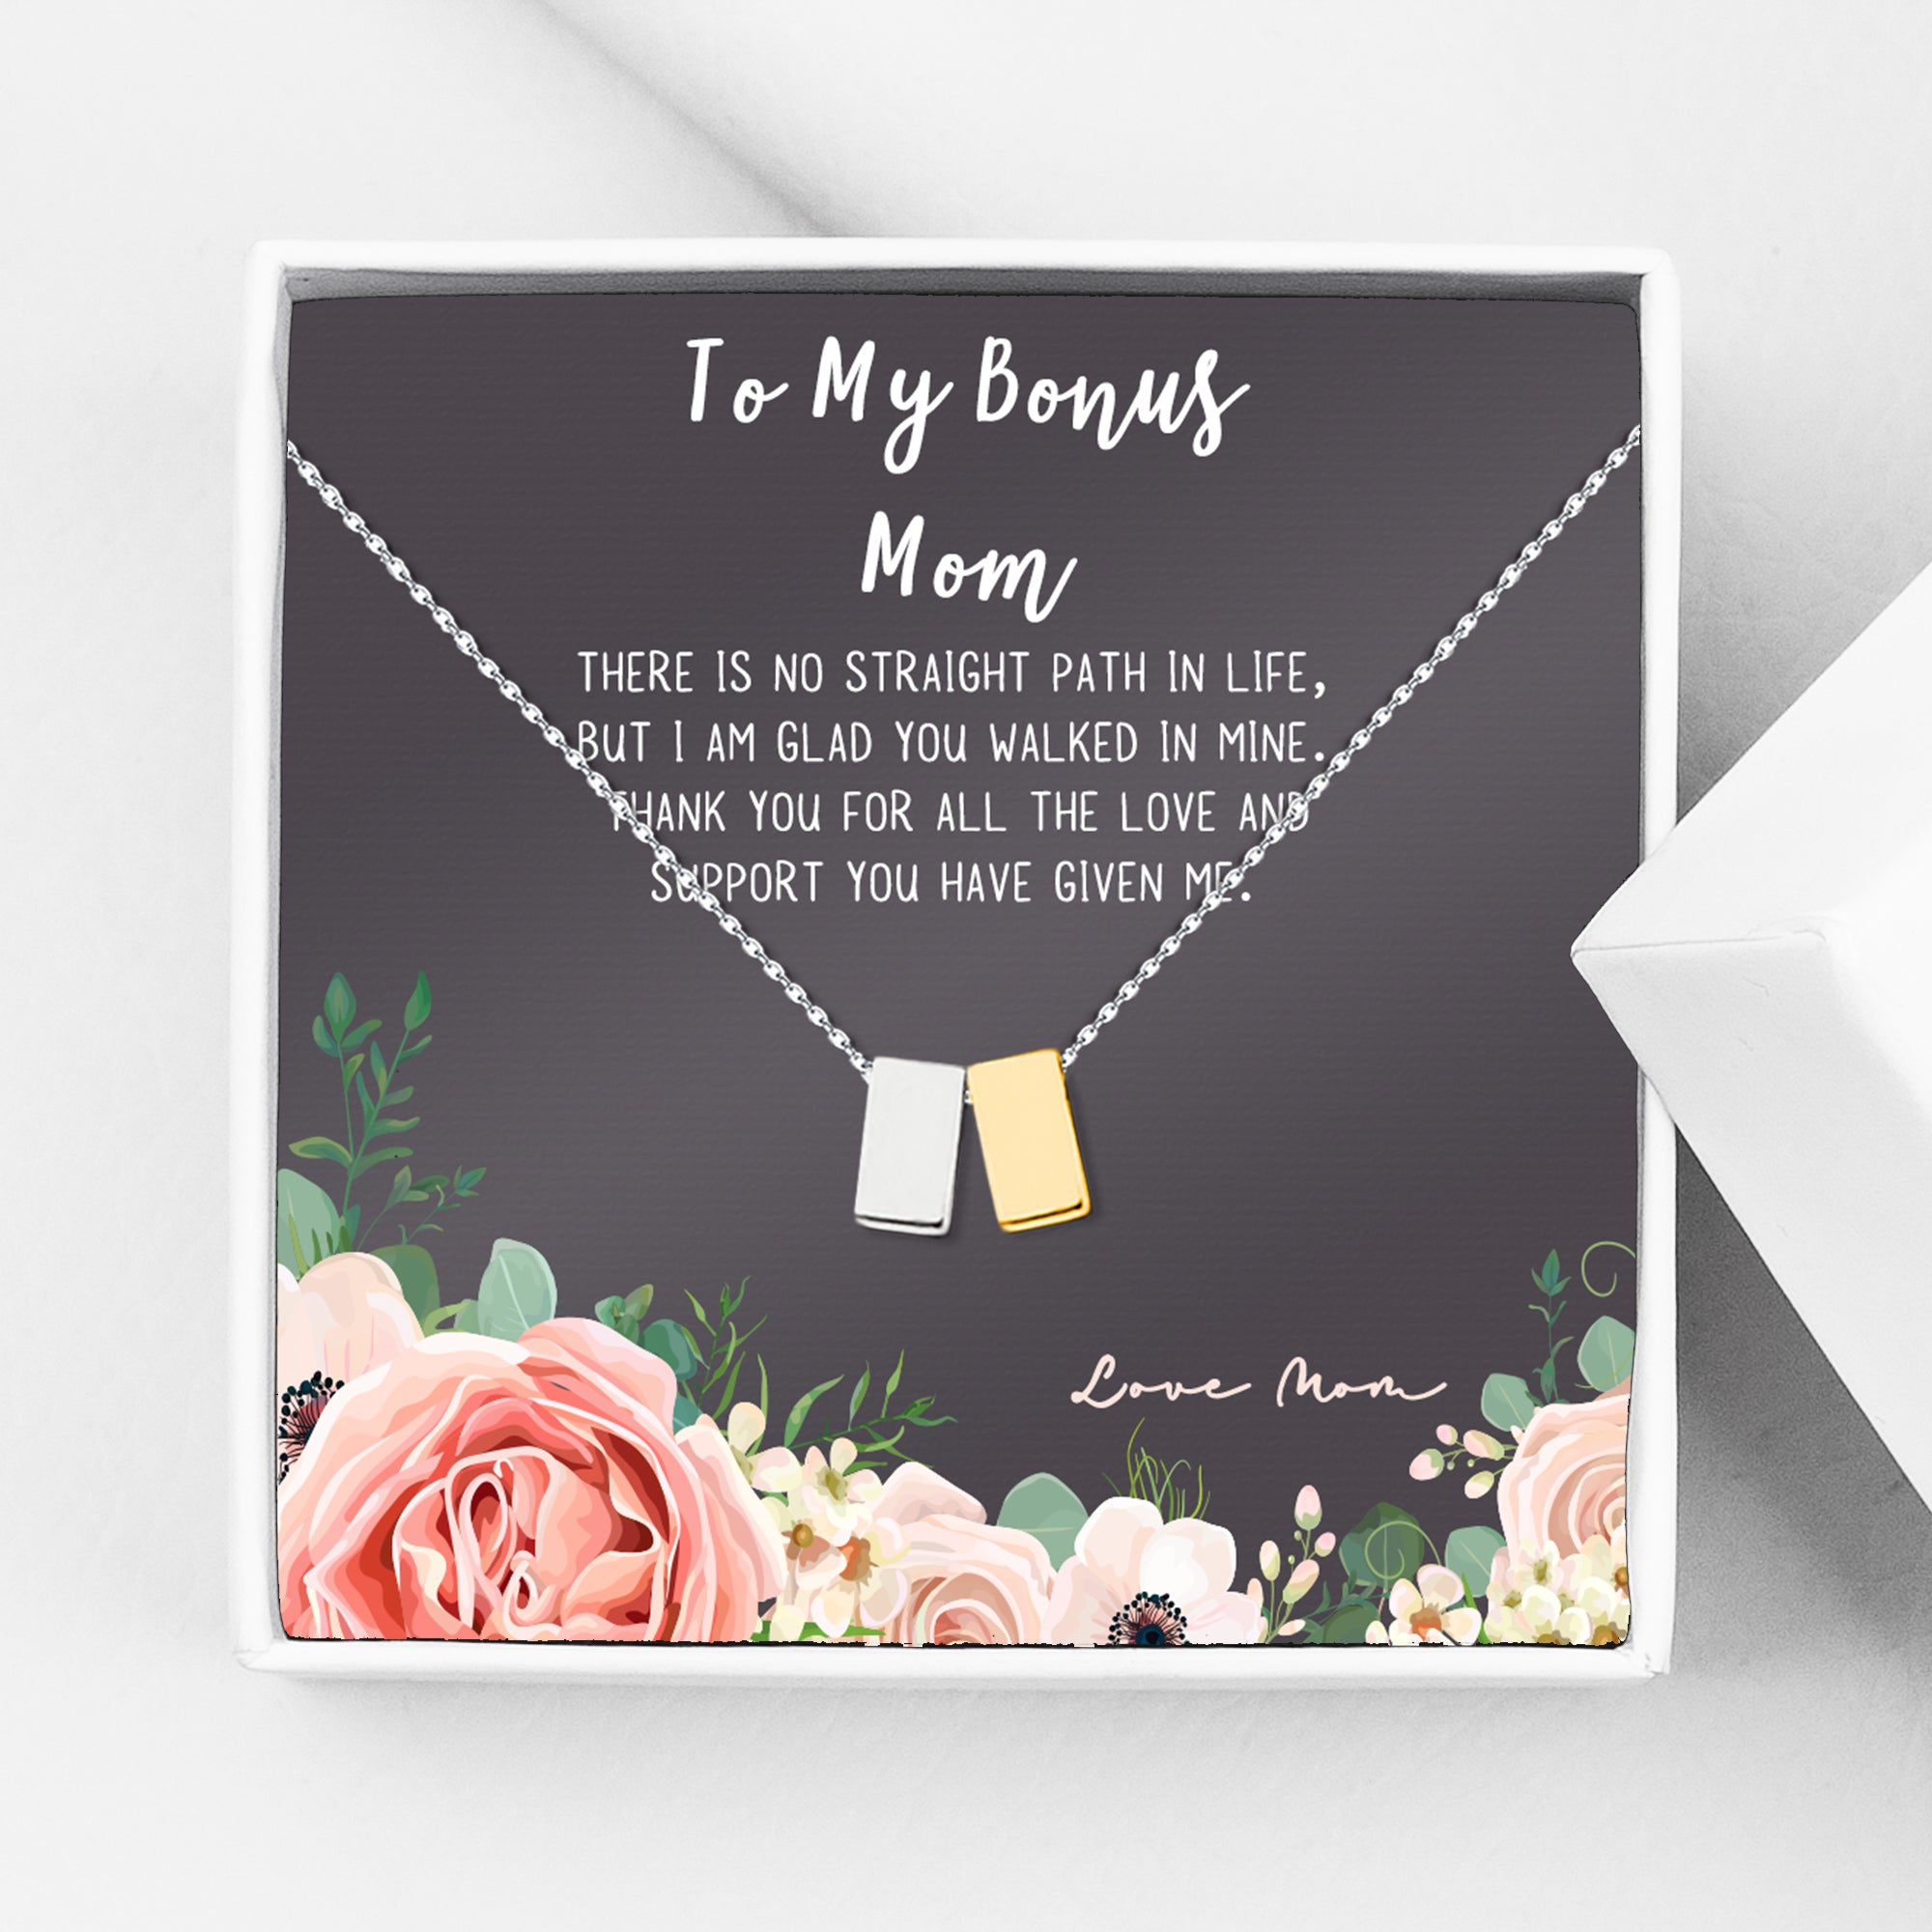 Bonus Mom Gifts, Birthday Gifts for Bonus Mom, Gifts for Stepmom from Daughter or Son, Step Mom Gift Ideas, Best Stepmom Gifts, Stepmother Gifts